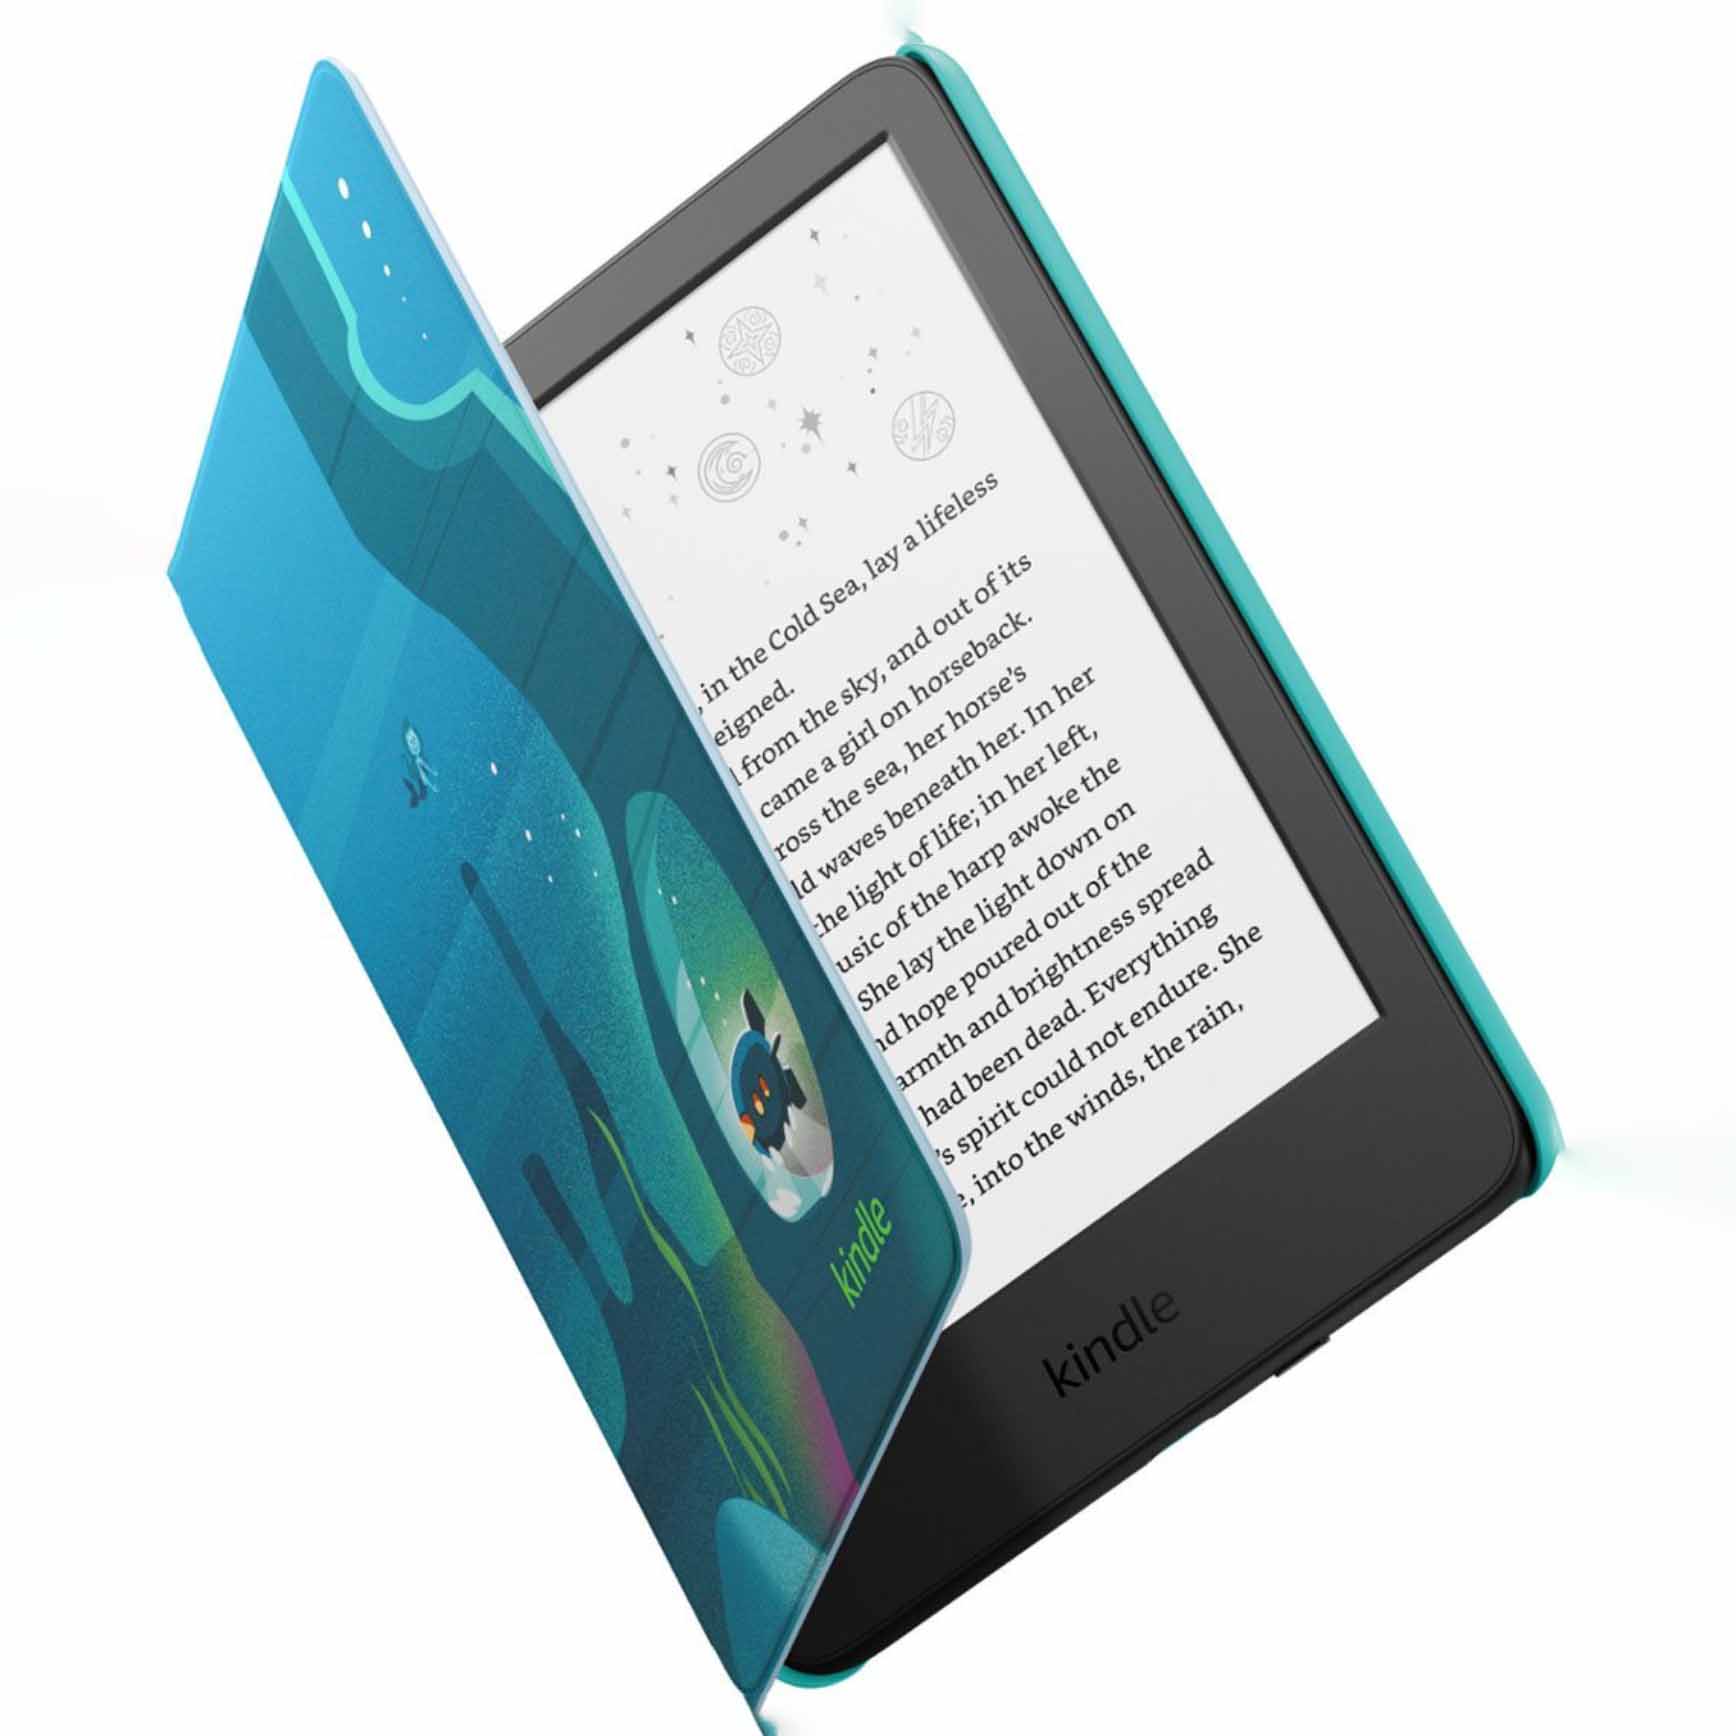 Kindle in book cover with ocean images